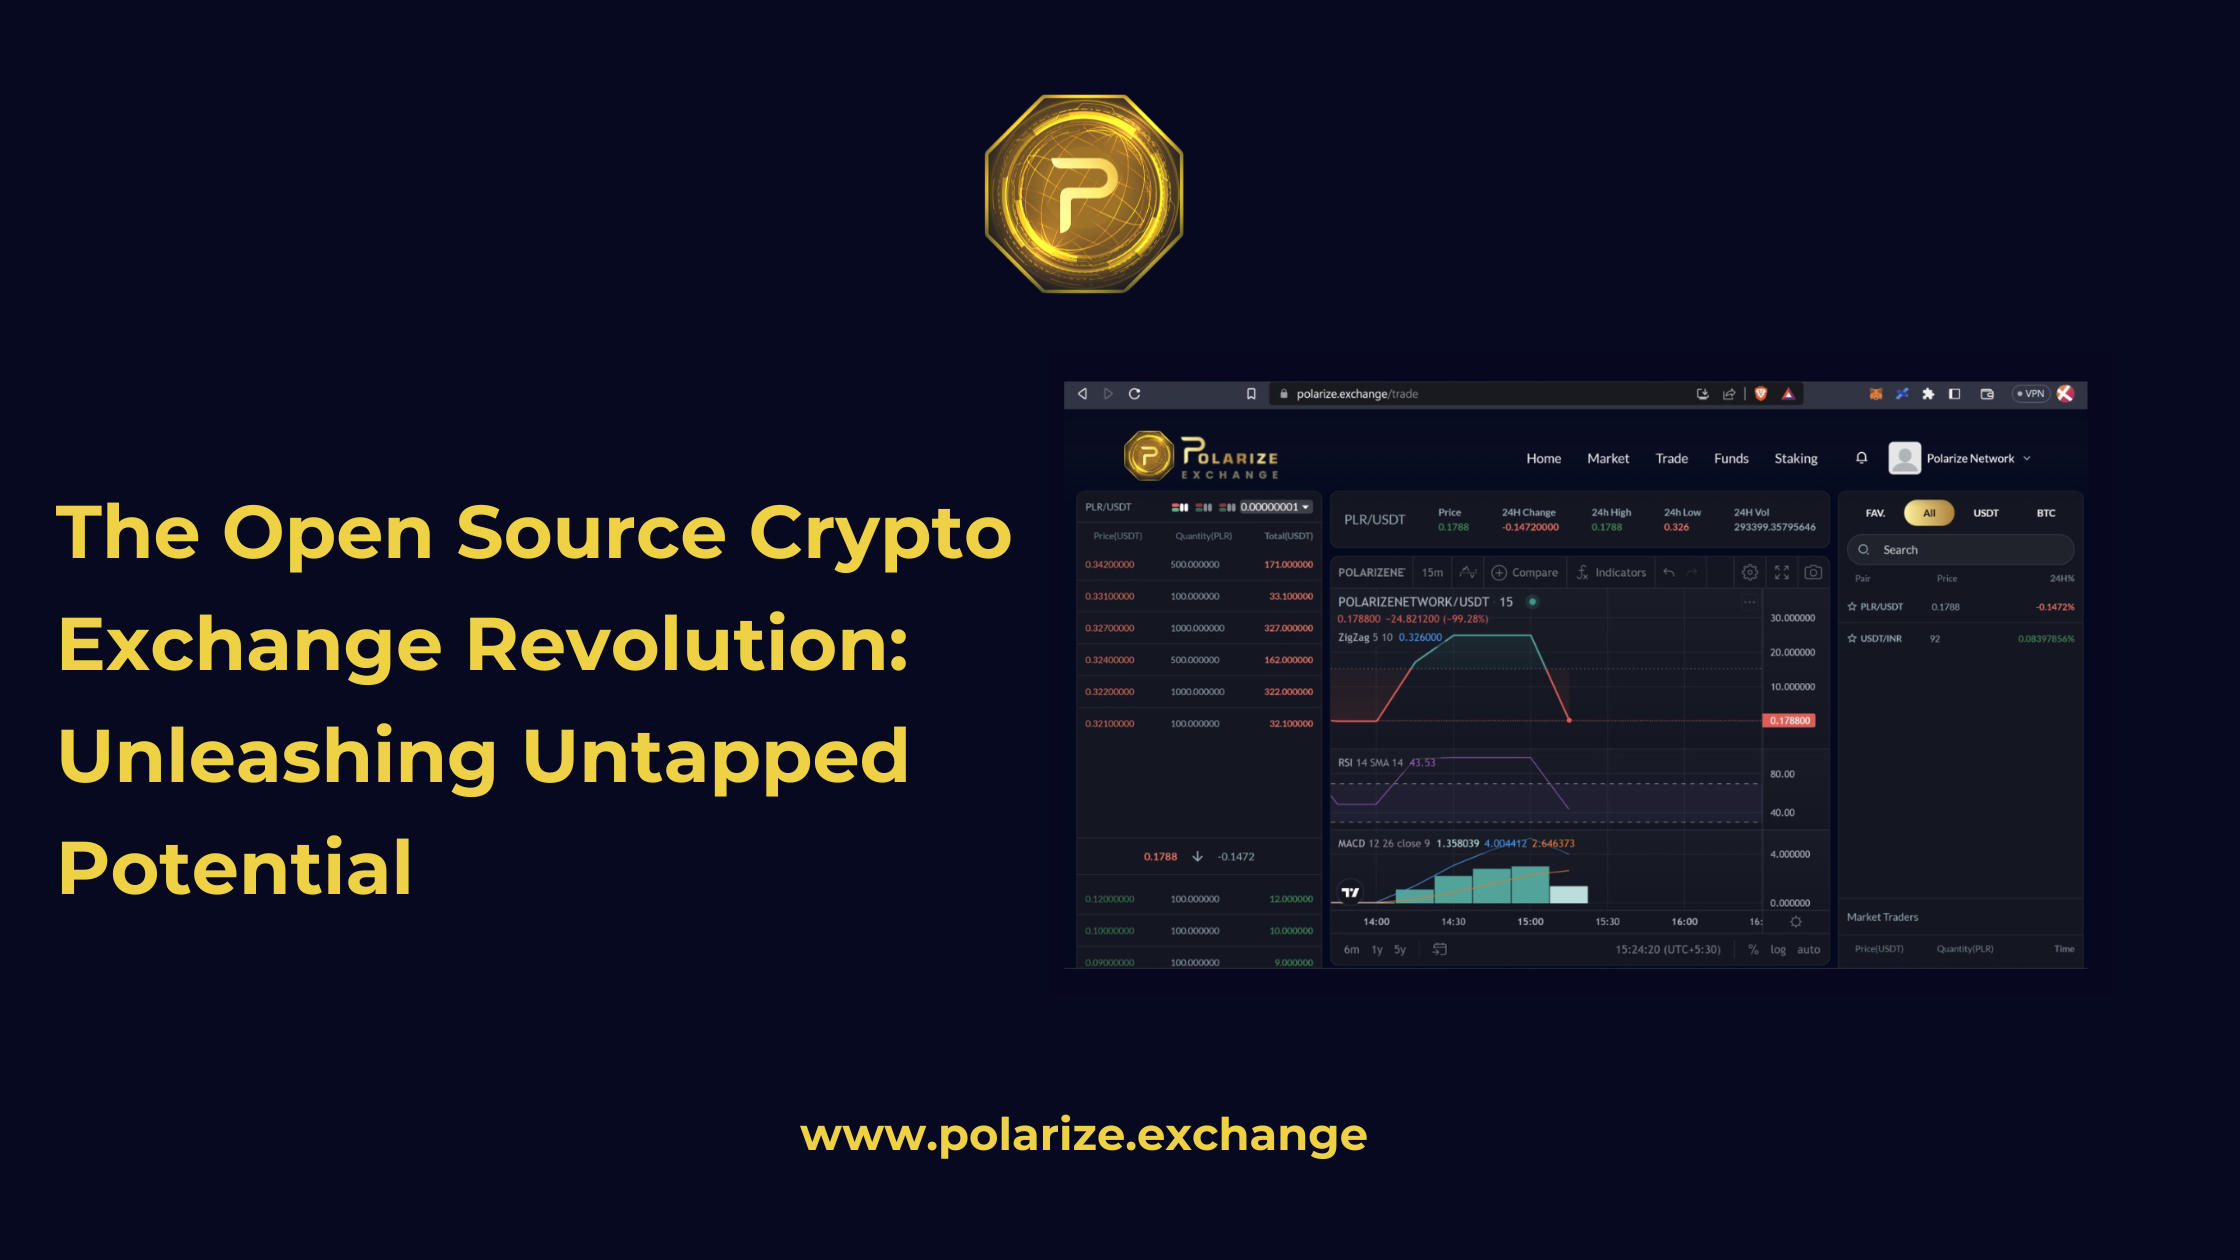 The Open Source Crypto Exchange Revolution: Unleashing Untapped Potential